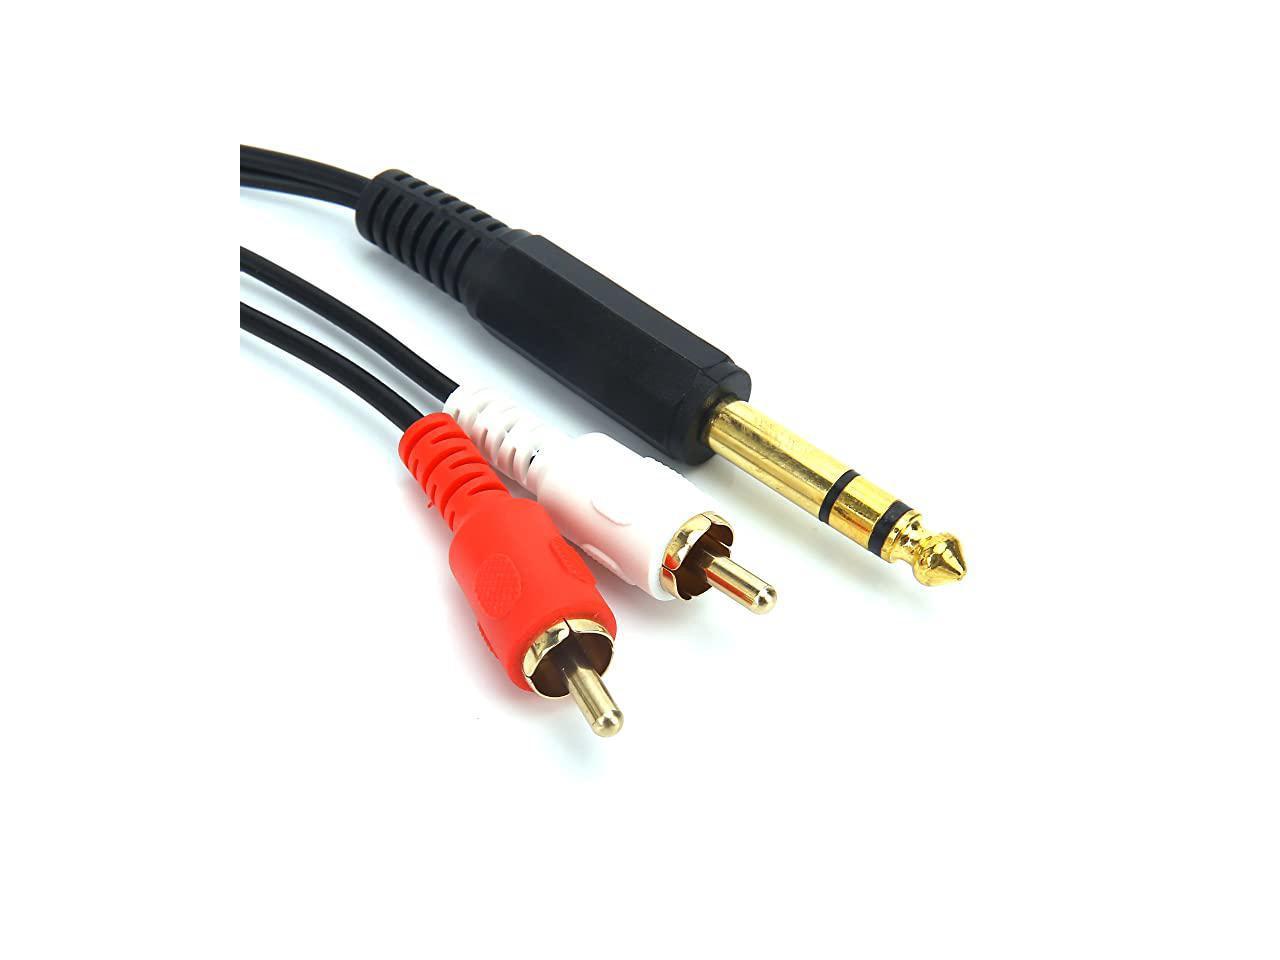 SiYear 6.35mm 1/4 inch Male Plug Stereo to 2 Dual 1/4TRS Female Jack Connector Audio Speaker Cable 20CM / 8Inch Y Splitter Adapter Cable 